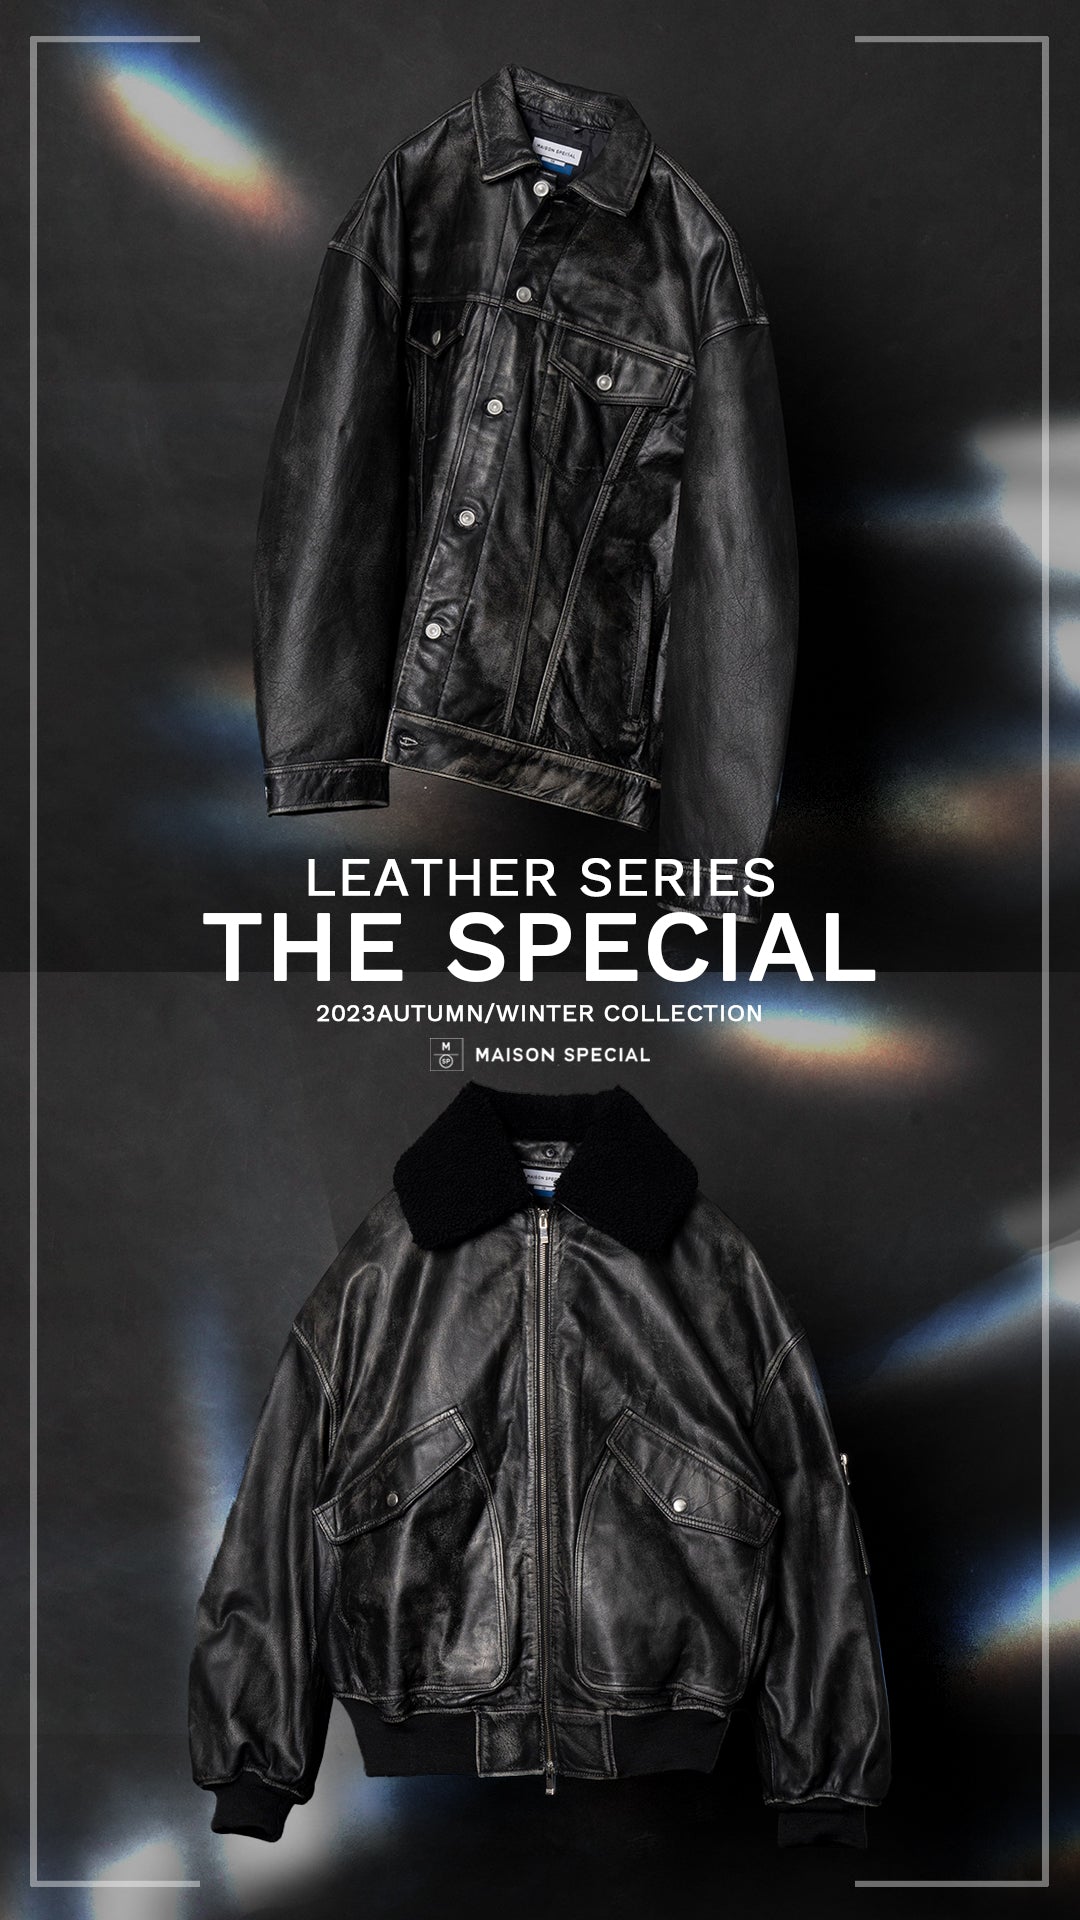 LEATHER SERIES